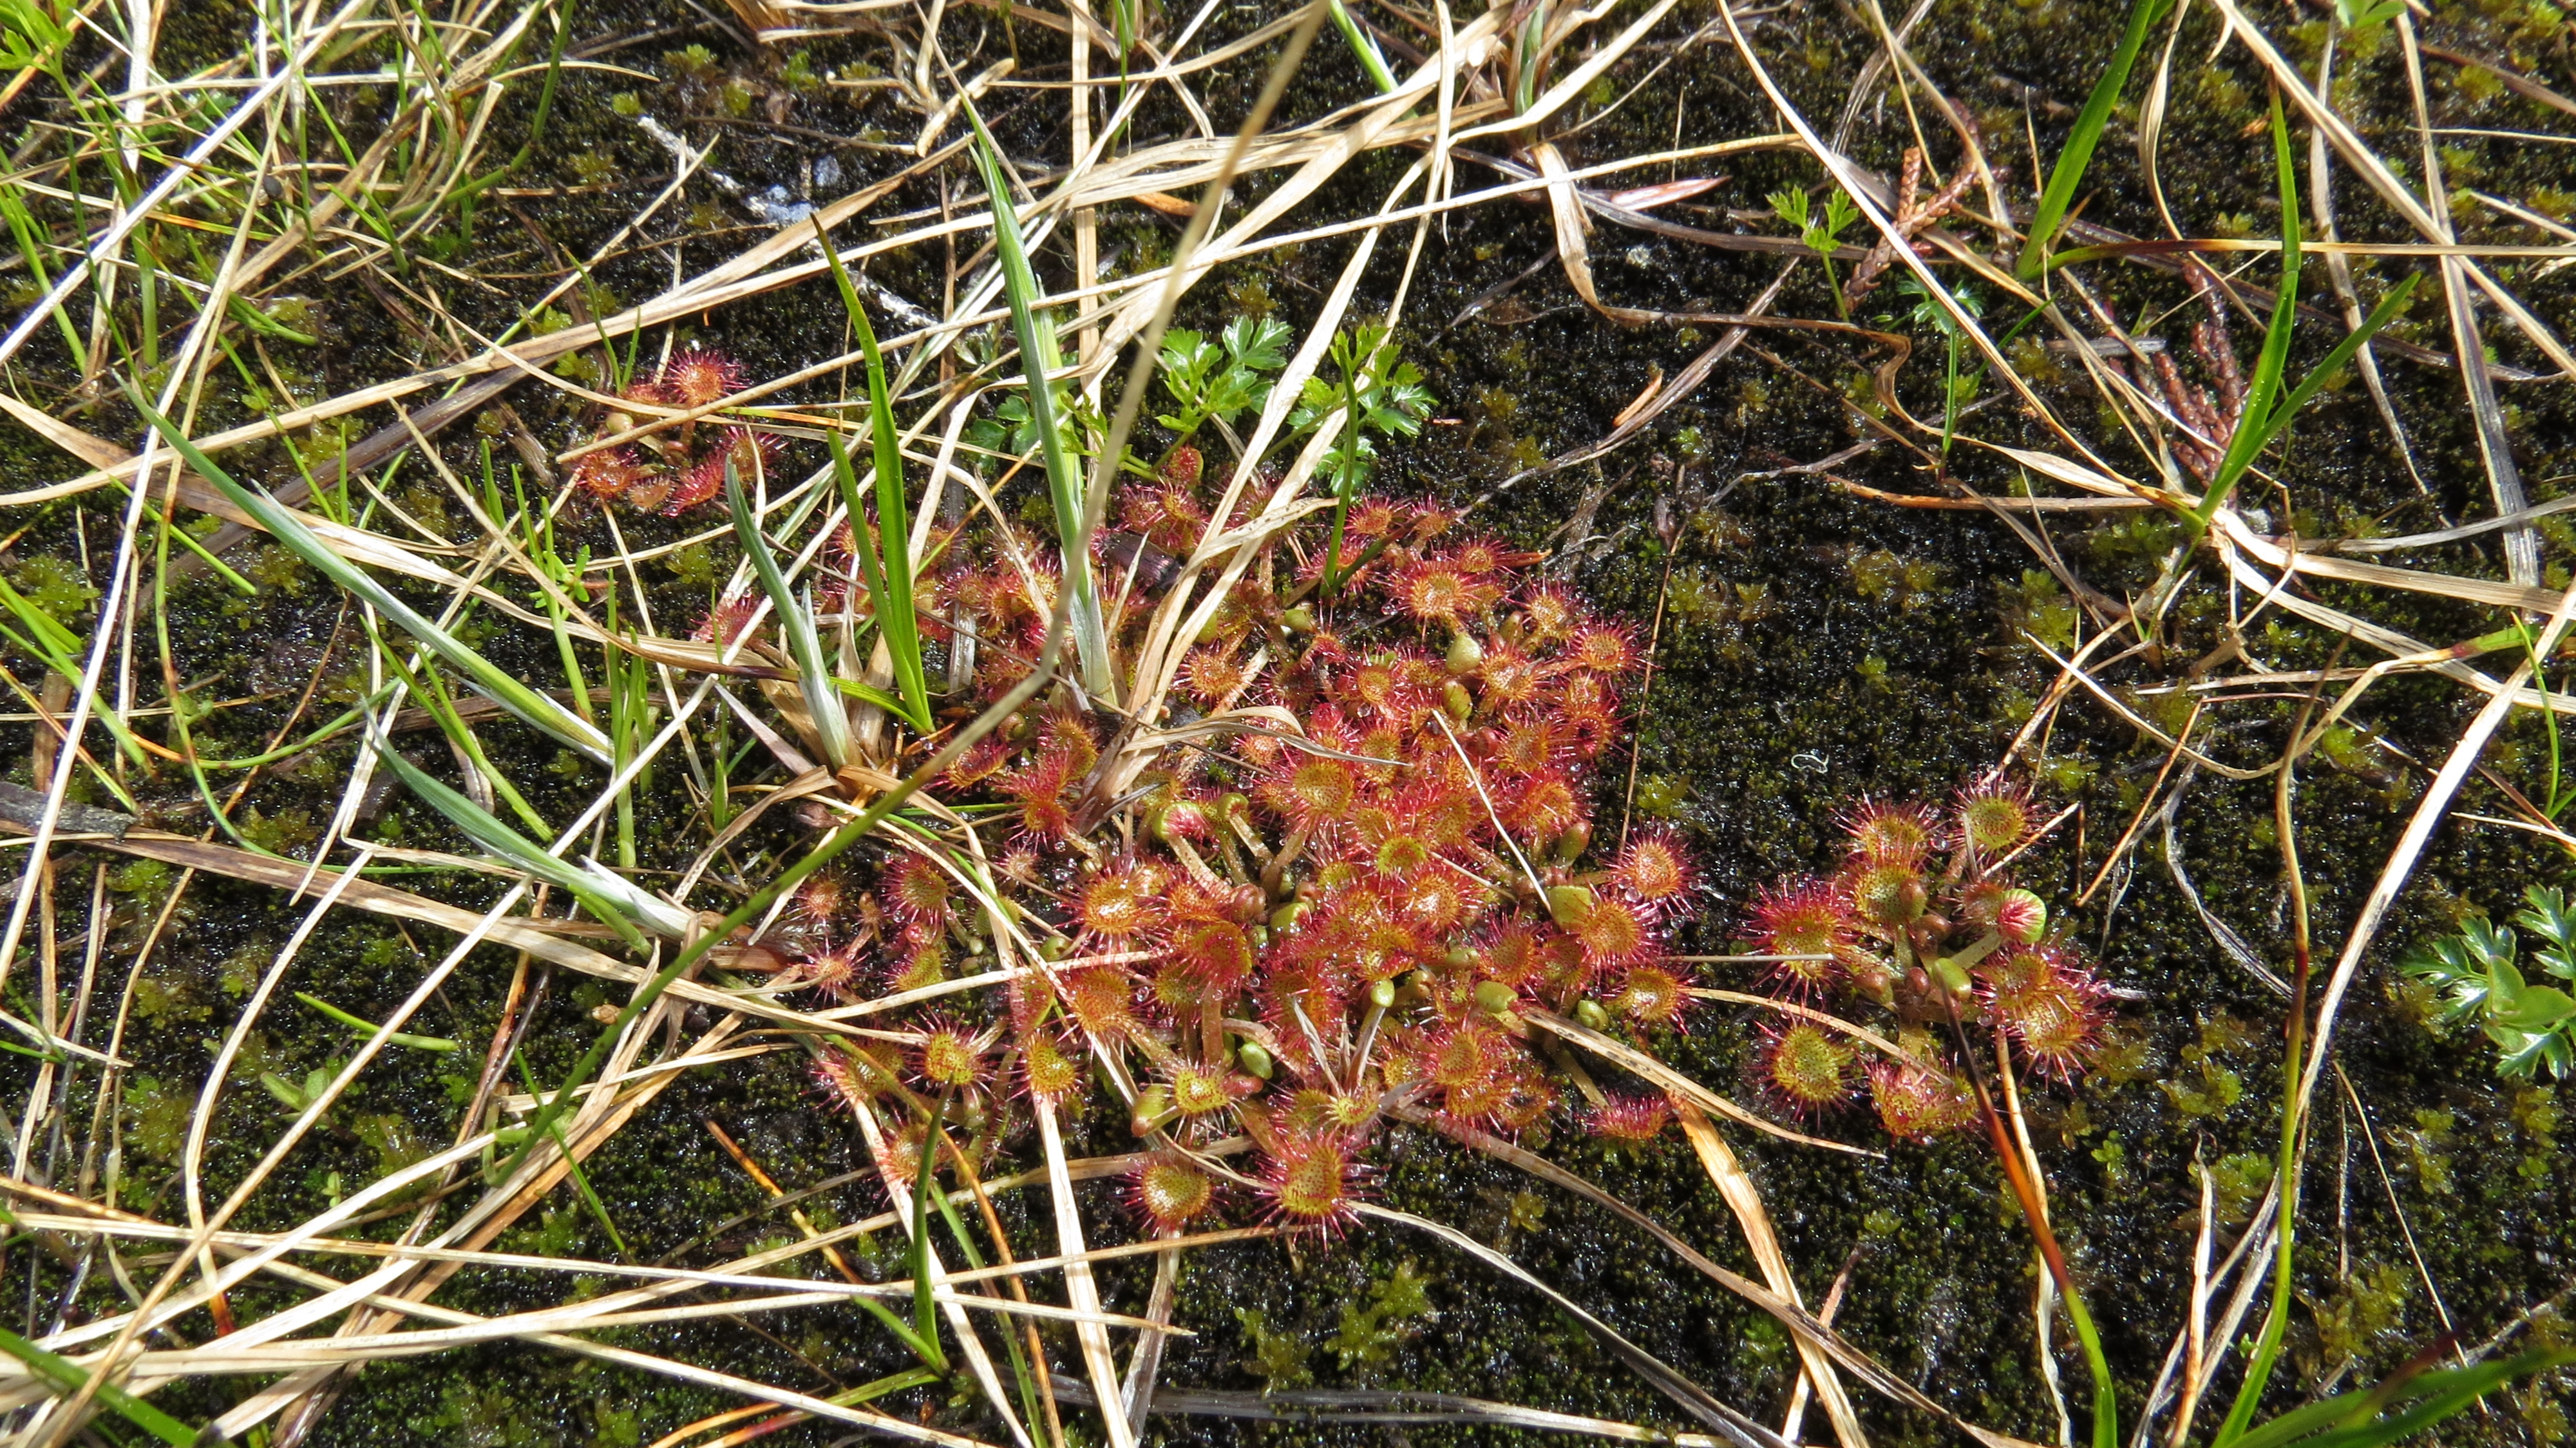 Carnivorous plant (sundew) inside bog threatened by BCTS logging